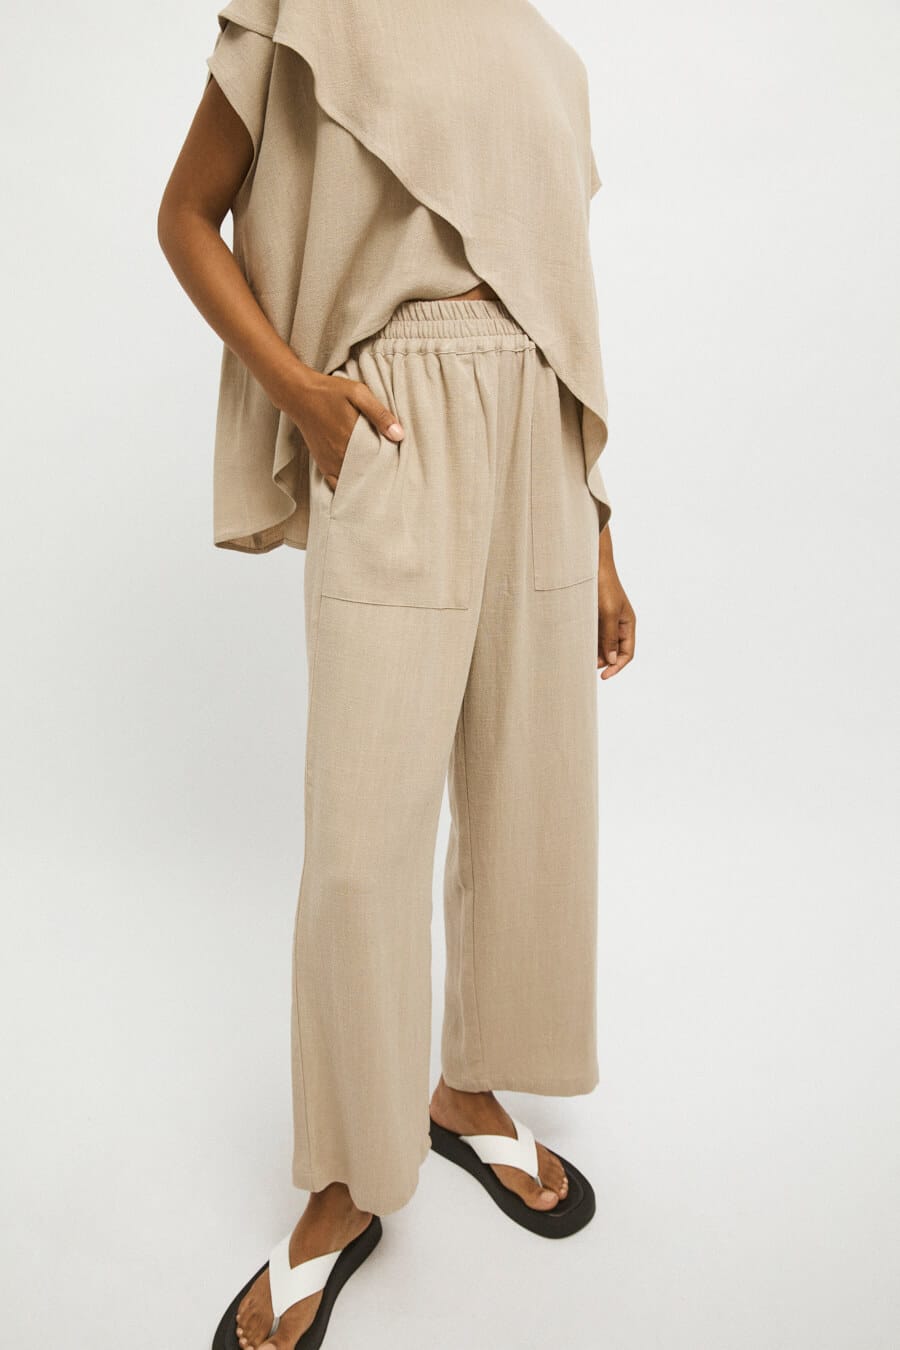 rita row tabita pant / Long linen pants. High-waisted model with covered elastic at the waist, side pockets with stitched detail, back patch pocket and wide legs. Relaxed cut. Ethically made in Portugal.